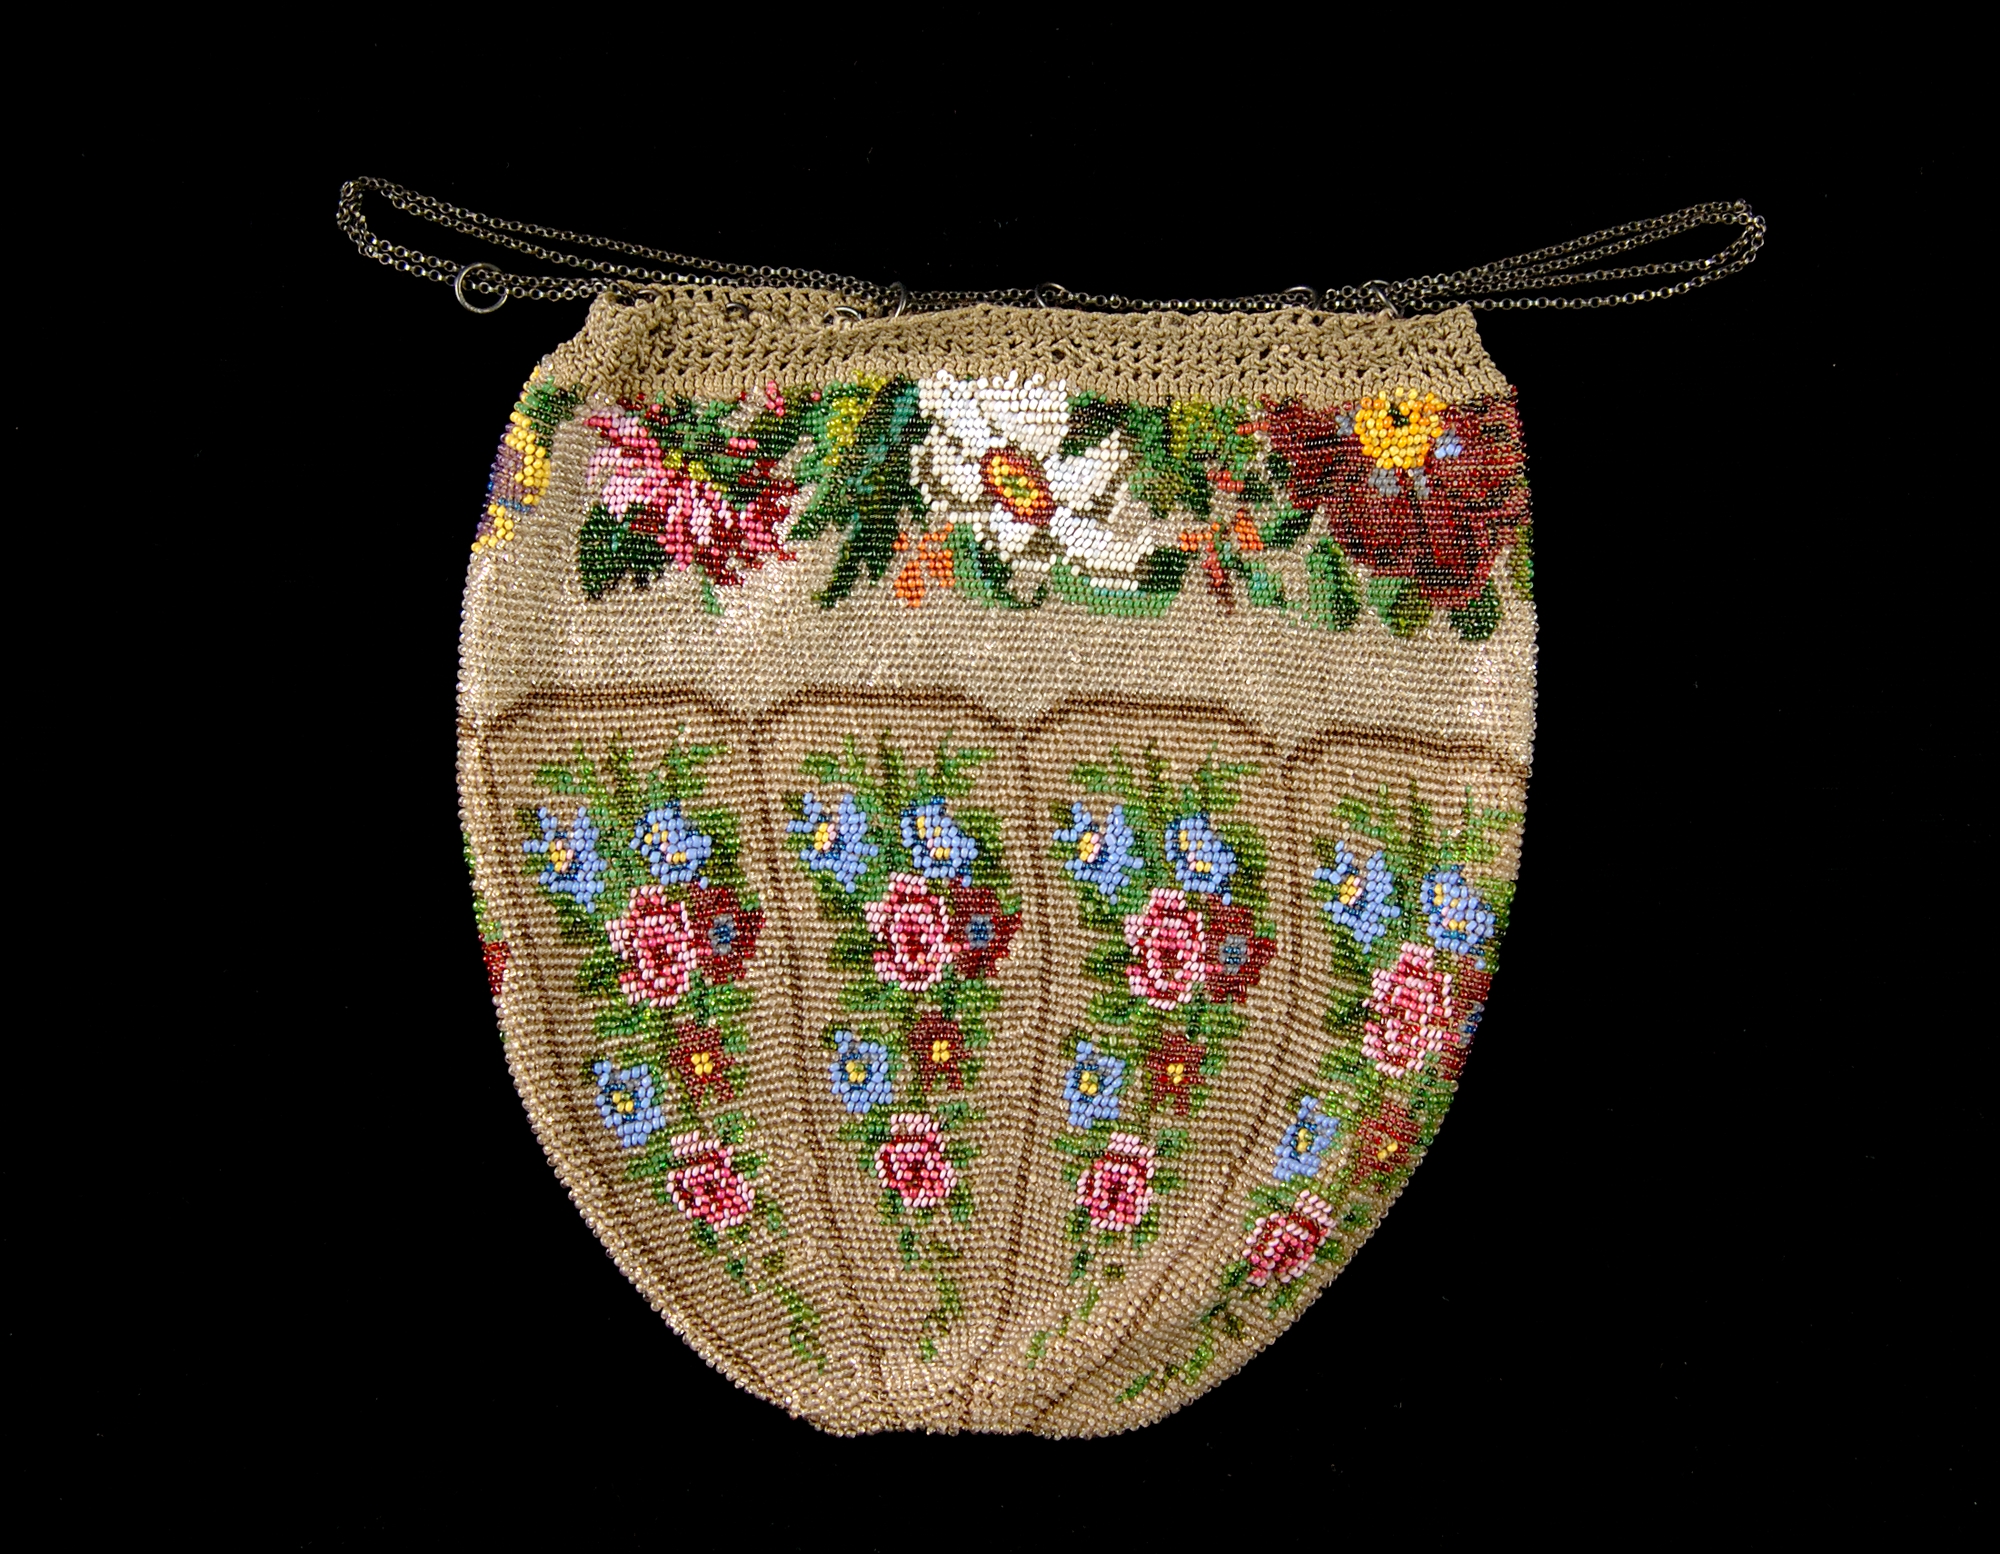 Pouch | American | The Metropolitan Museum of Art